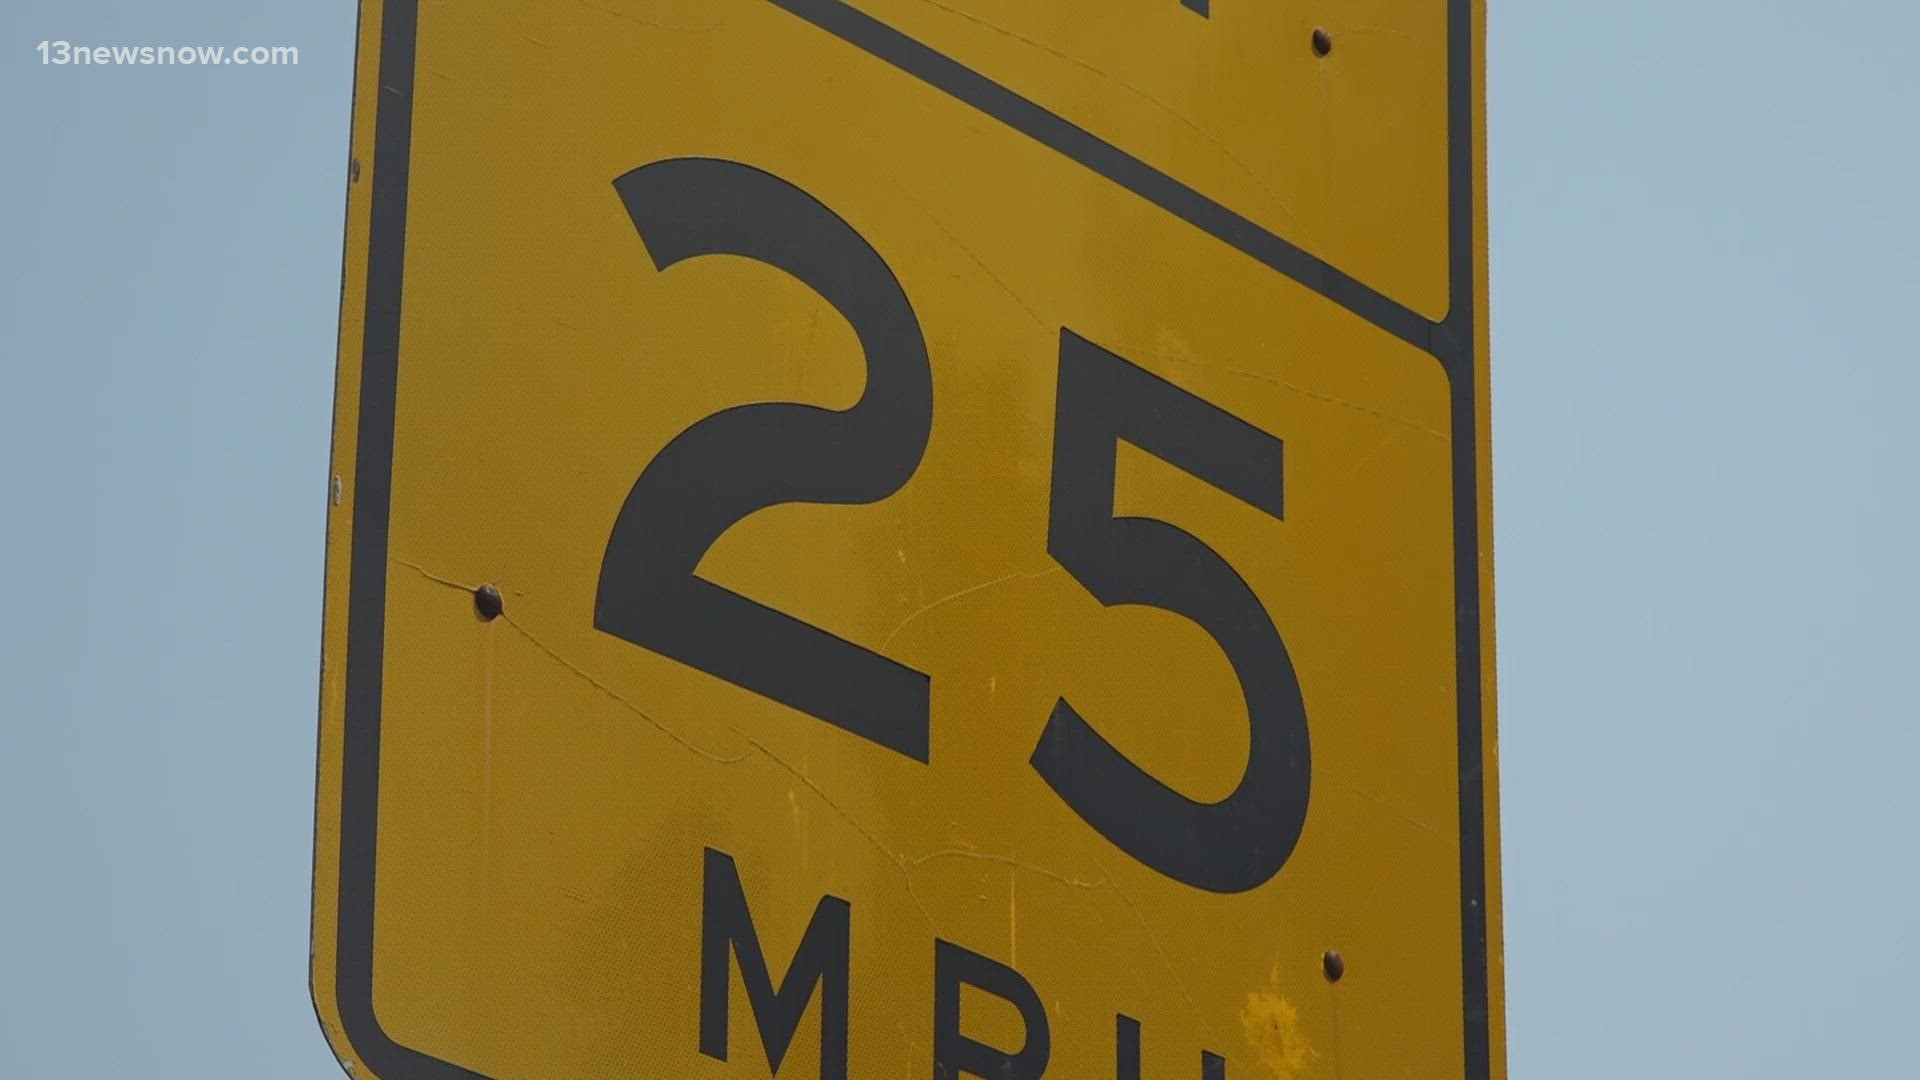 VDOT leaders said the project started in late 2020 and is expected to wrap up by the end of 2022.